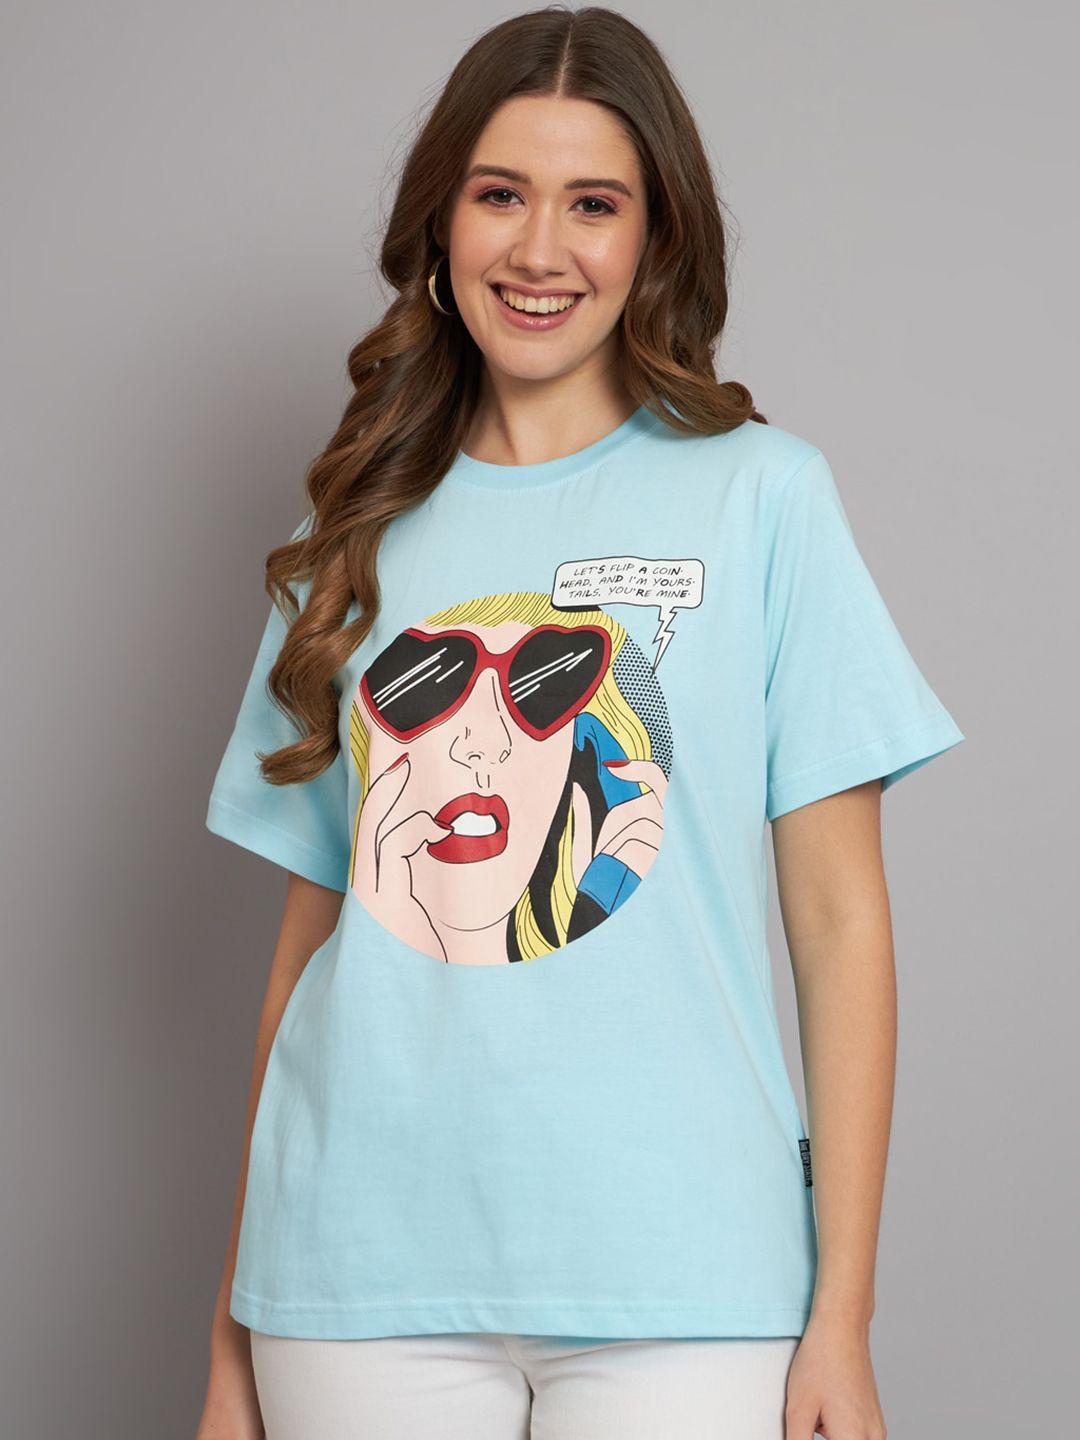 the-dry-state-turquoise-blue-&-red-colour-graphic-printed-cotton-loose-fit-t-shirt